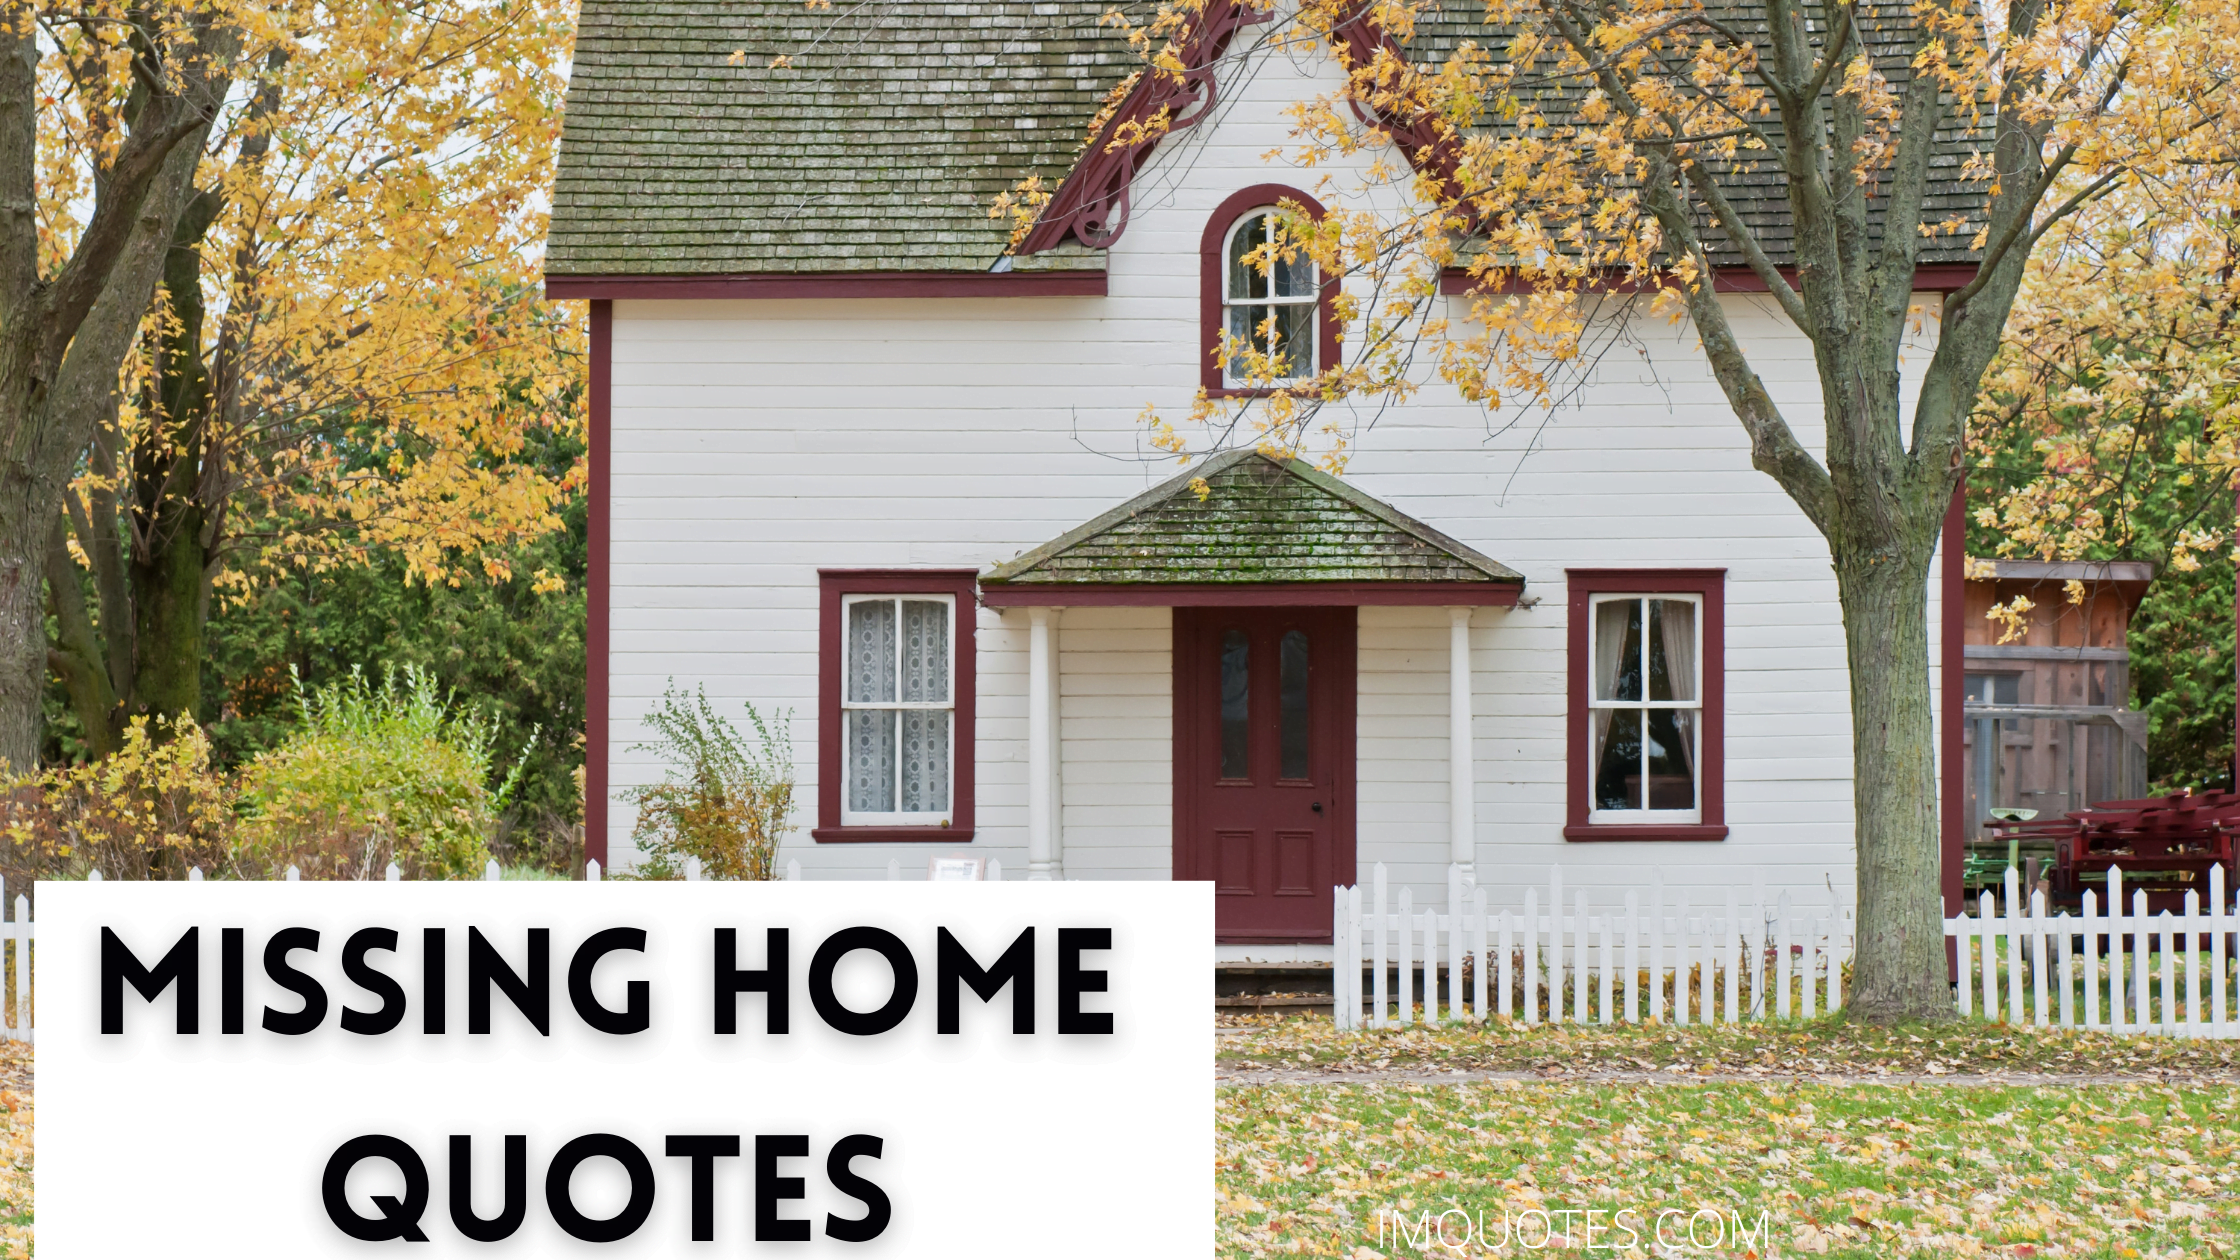 Missing Home Quotes1